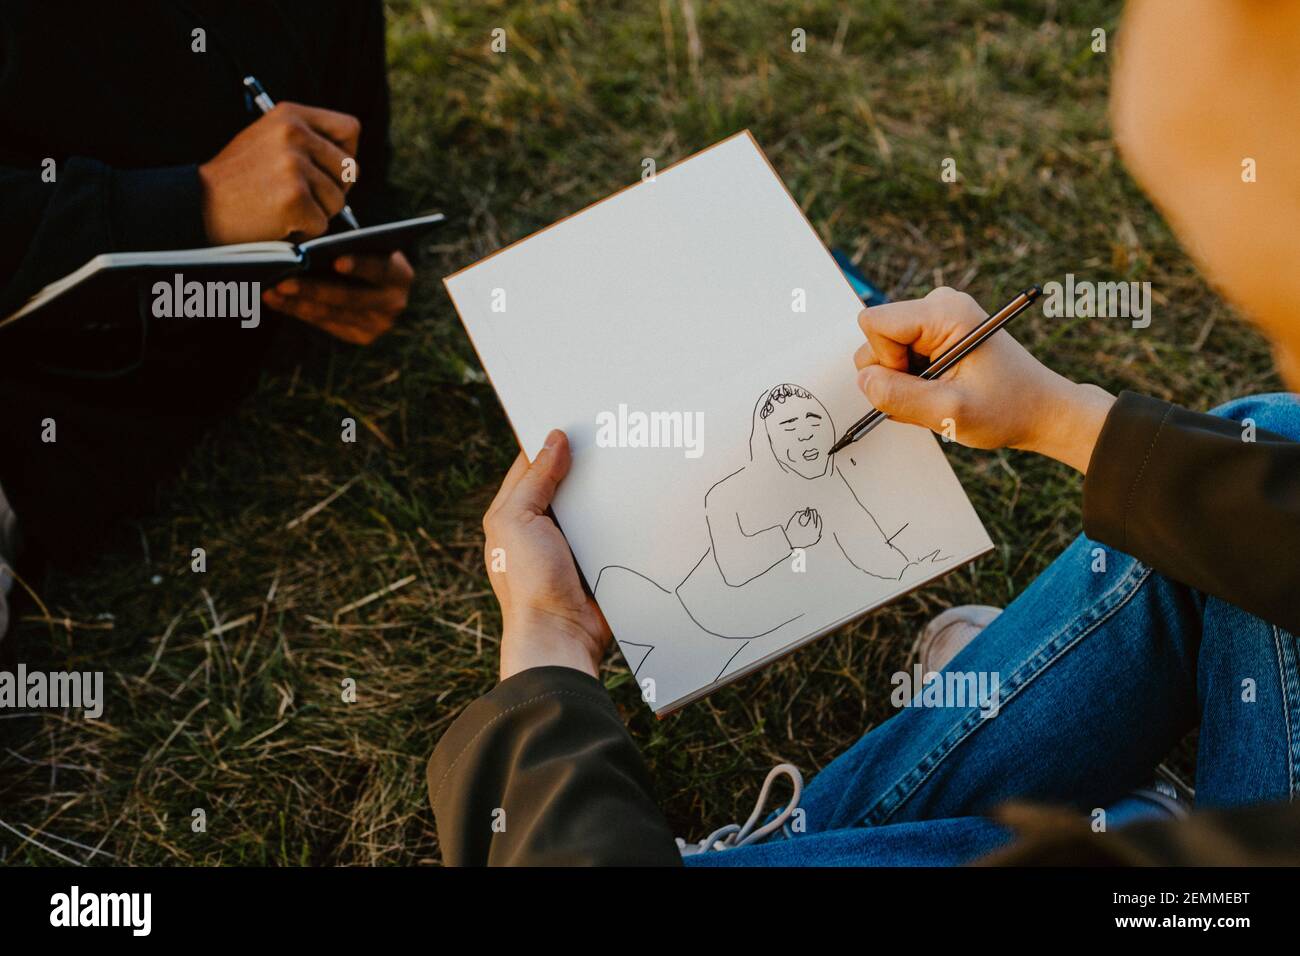 Cropped image of man's hands sketching in book at park Stock Photo